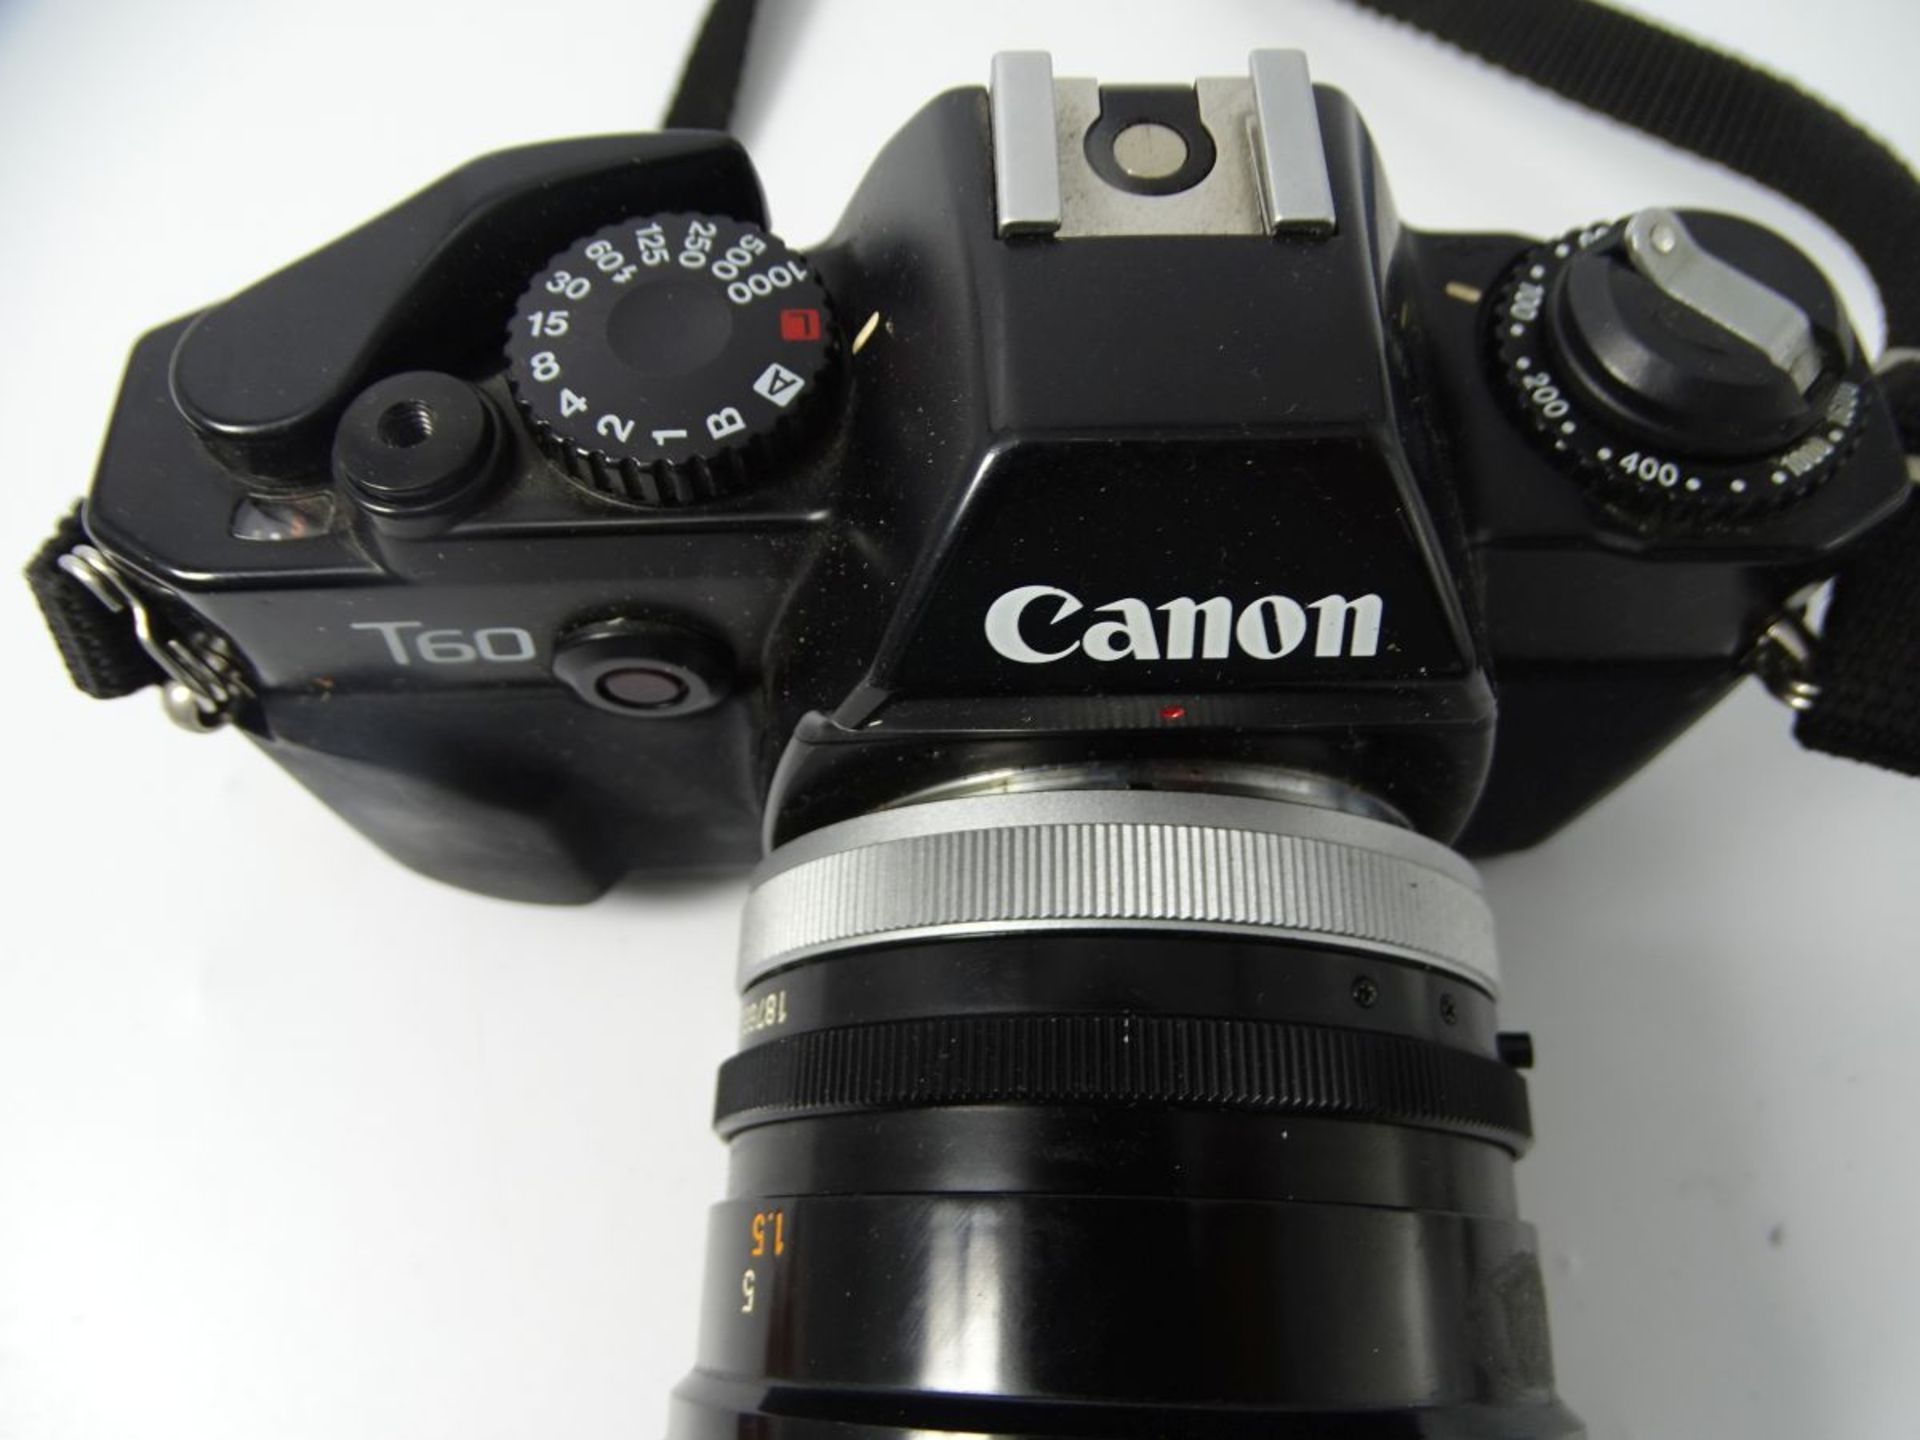 Fotoapparat "Canon T60" - Image 3 of 5